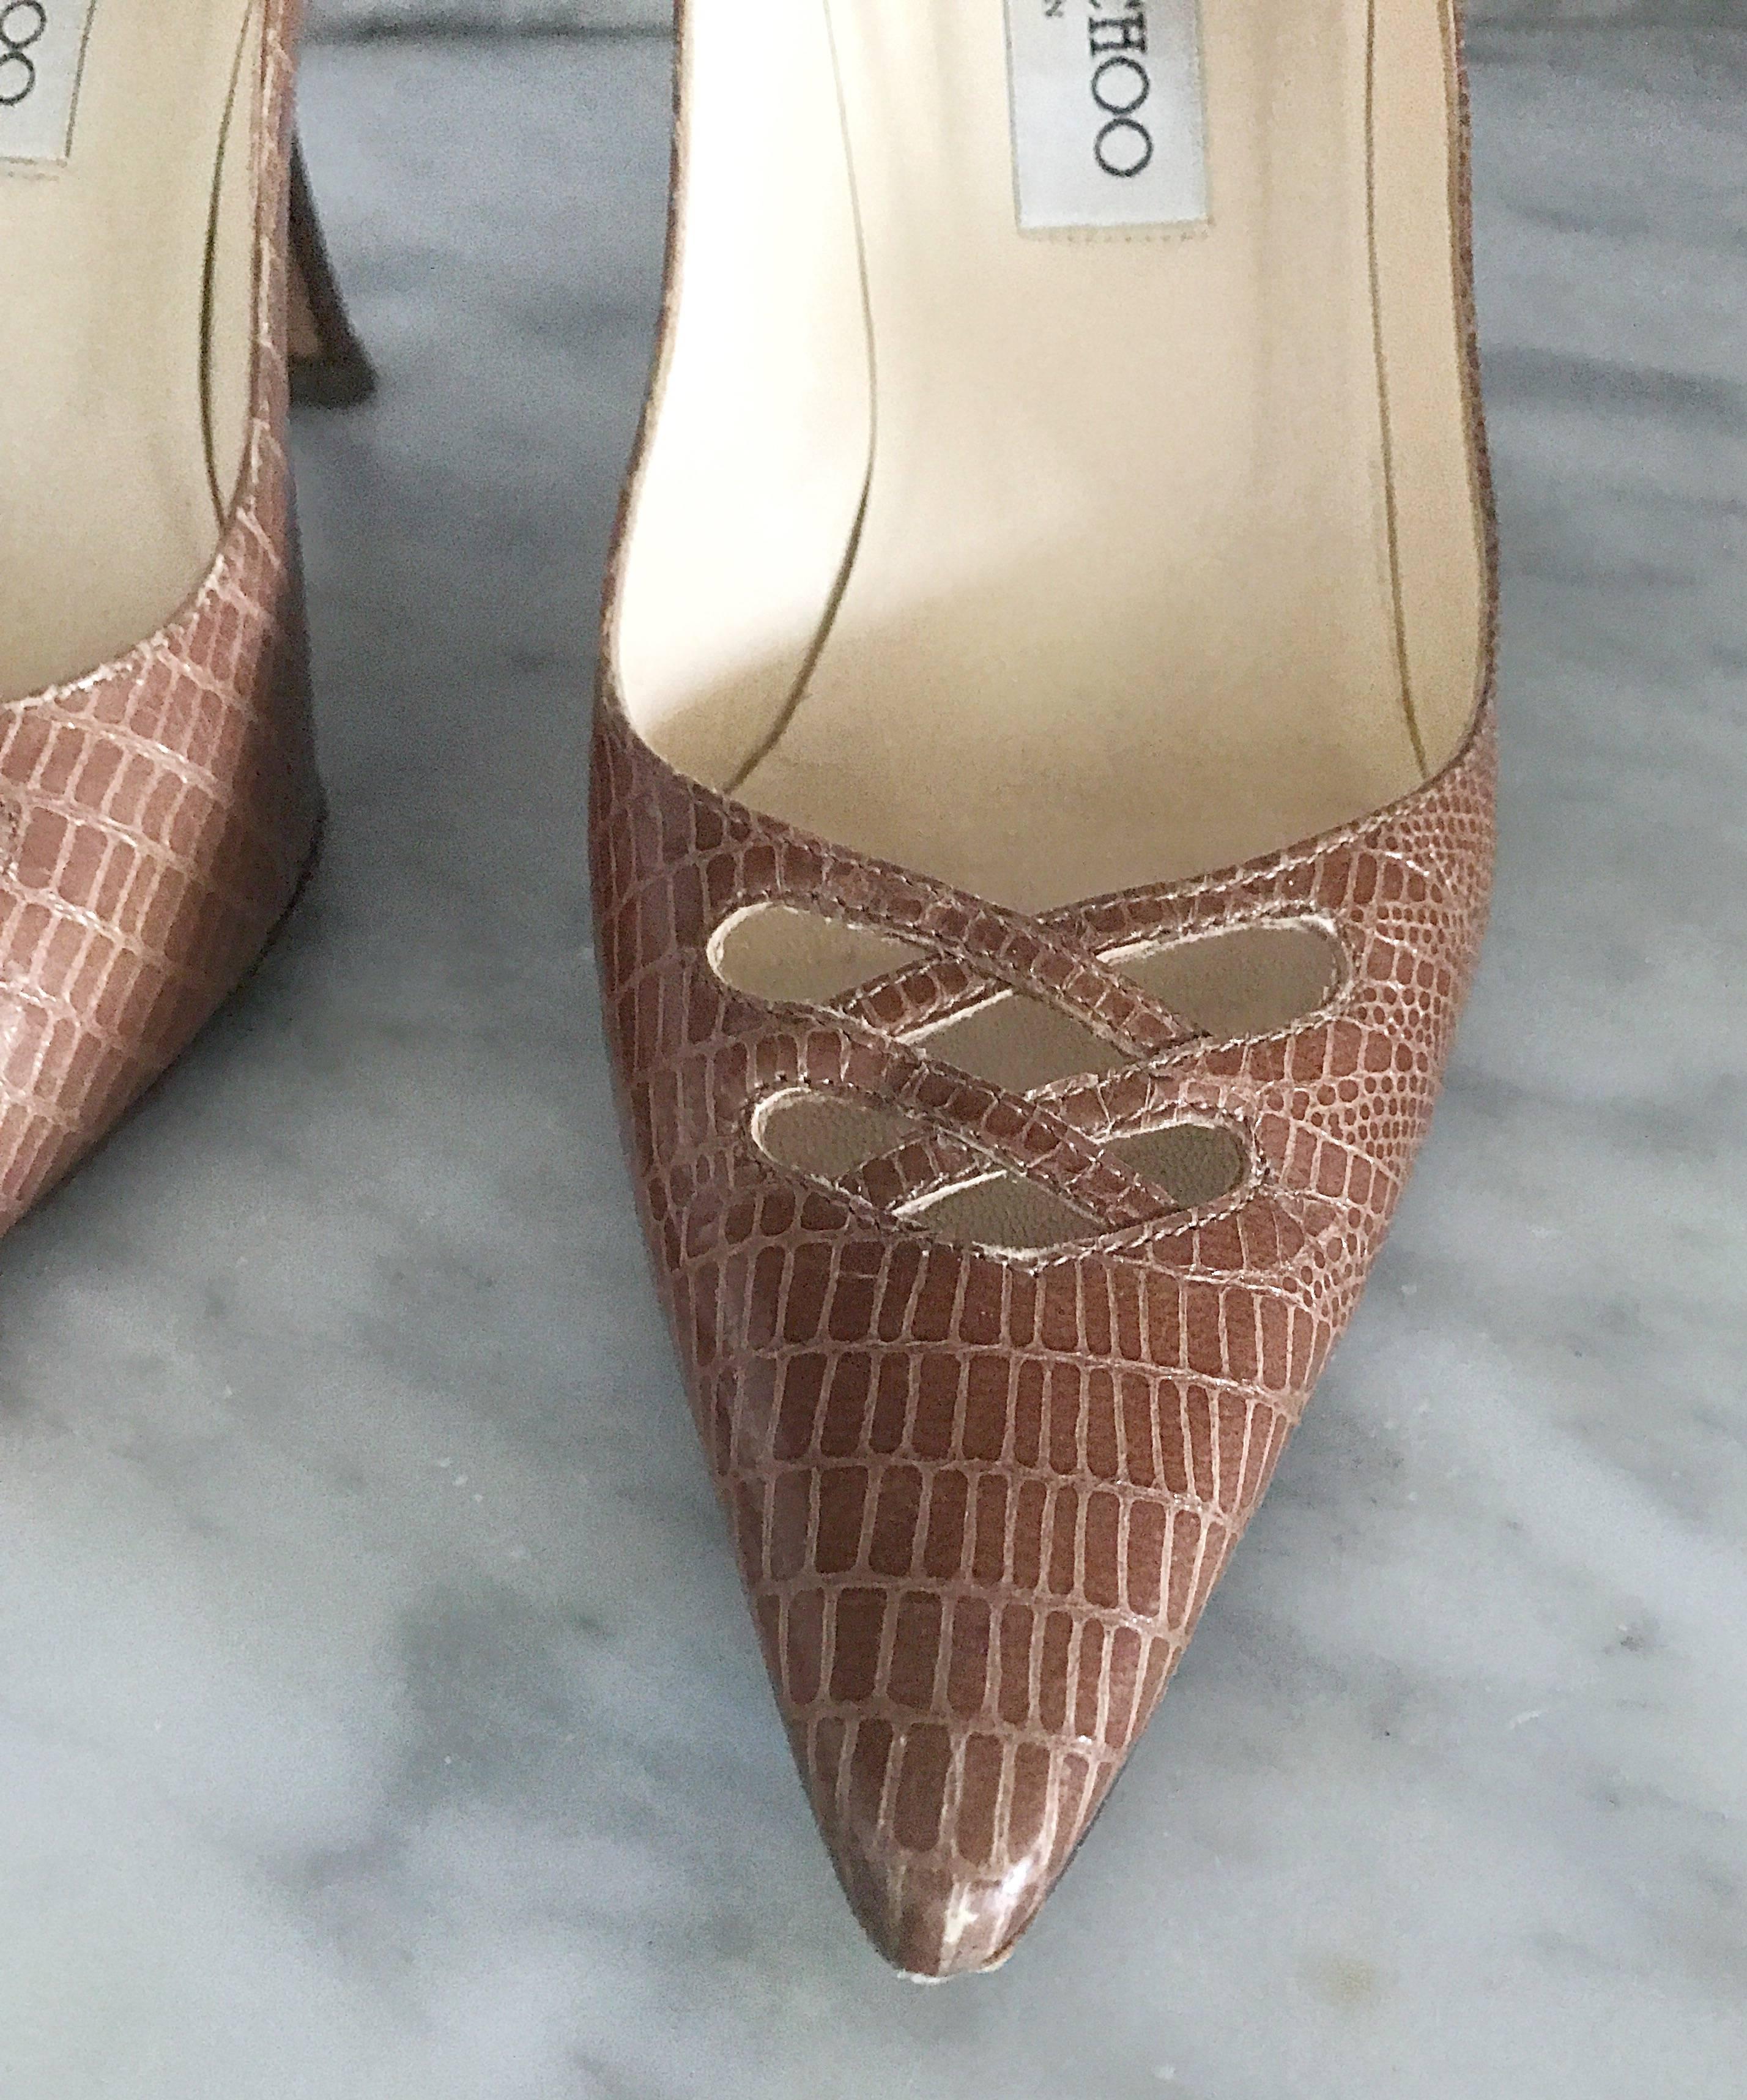 Sexy, sophisticated, stylish and comfortable JIMMY CHOO tan light brown lizard skin embossed stilettos! Features cut-out detail above the toes. 4.5 inch heels with a cushion toe pad. Can easily be dressed up or down. Great with jeans, or perfect